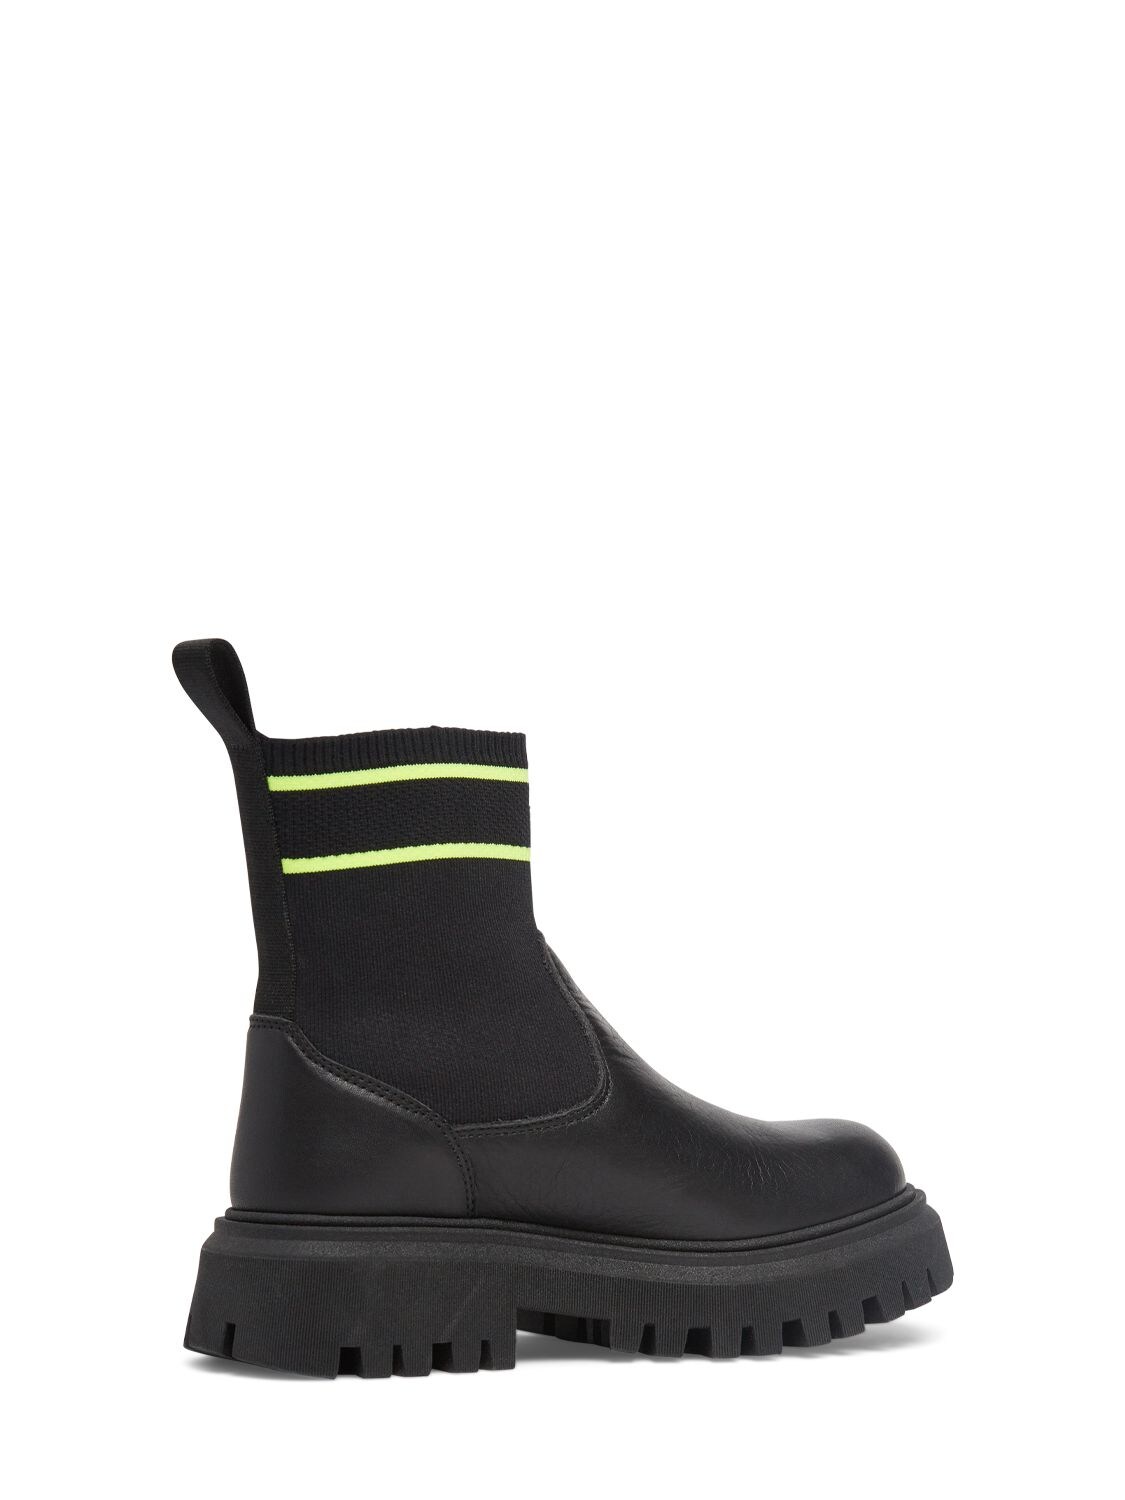 Shop Msgm Leather & Knit Pull On Boots W/logo In Black